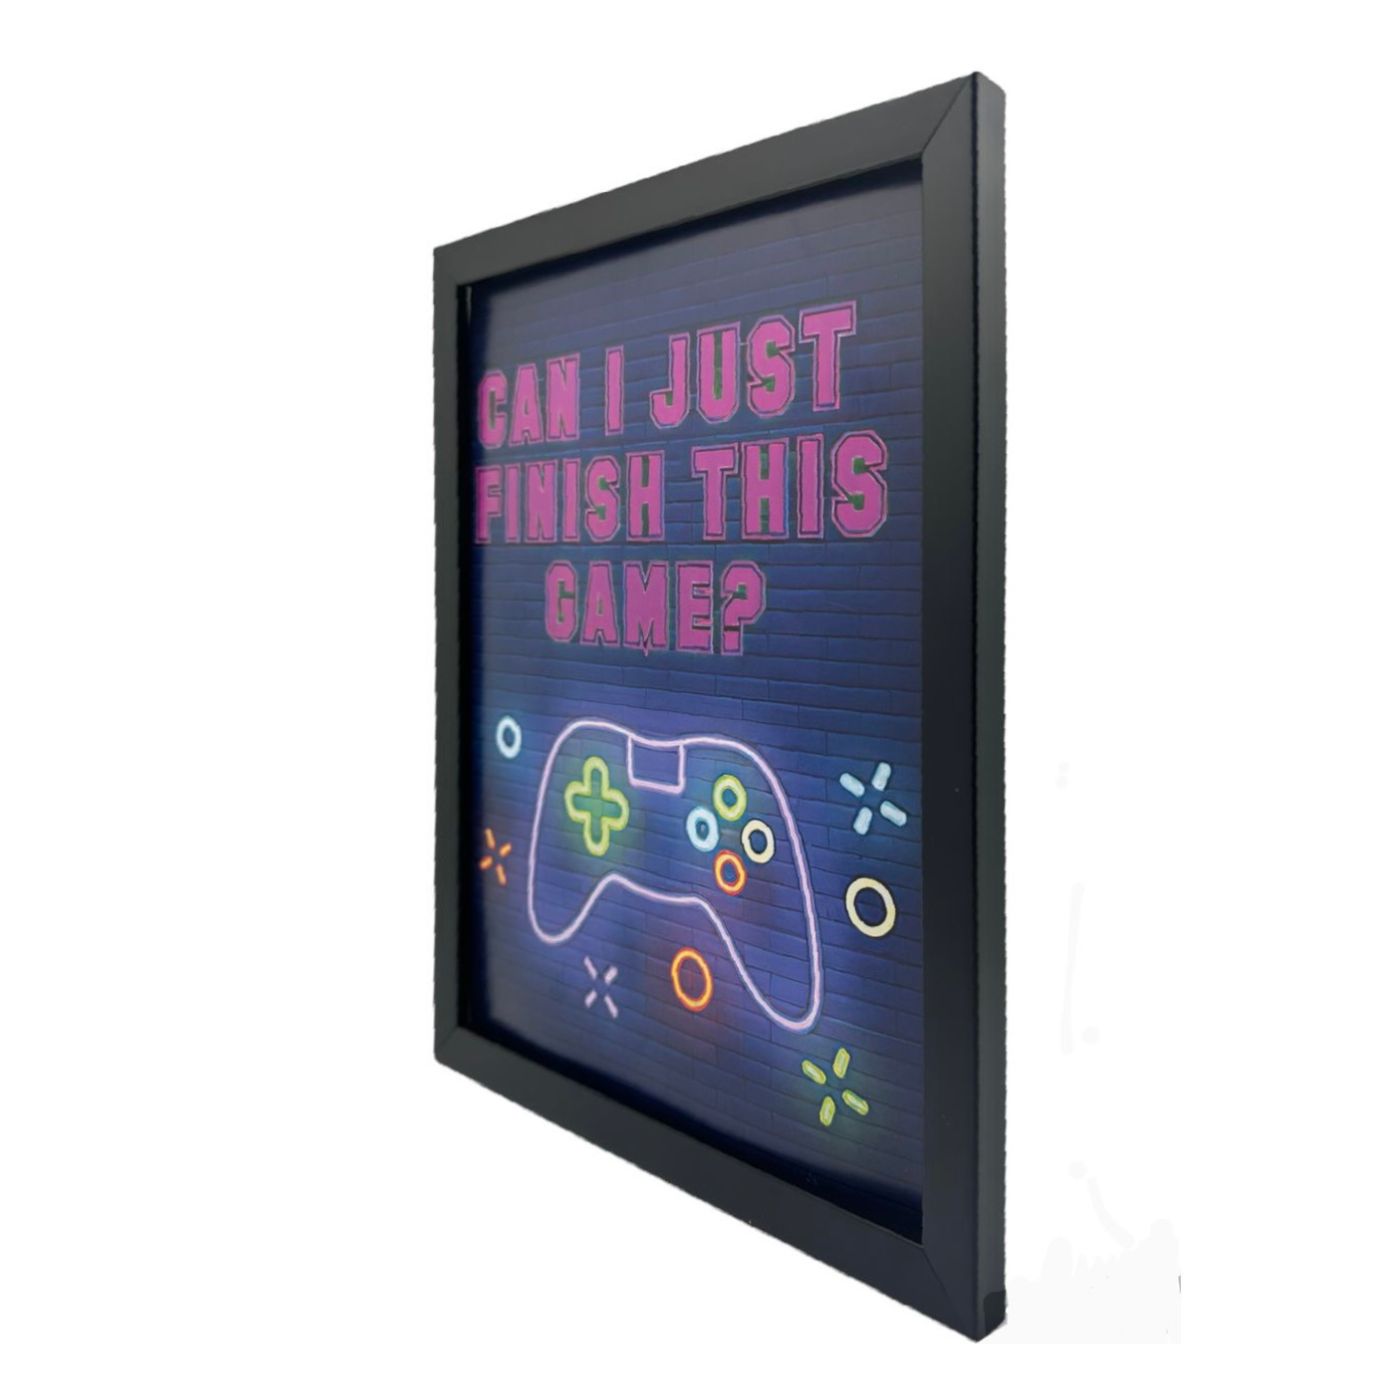 Vibrant Neon Game Wall Art with Frame - "Can I Just Finish This Game?"